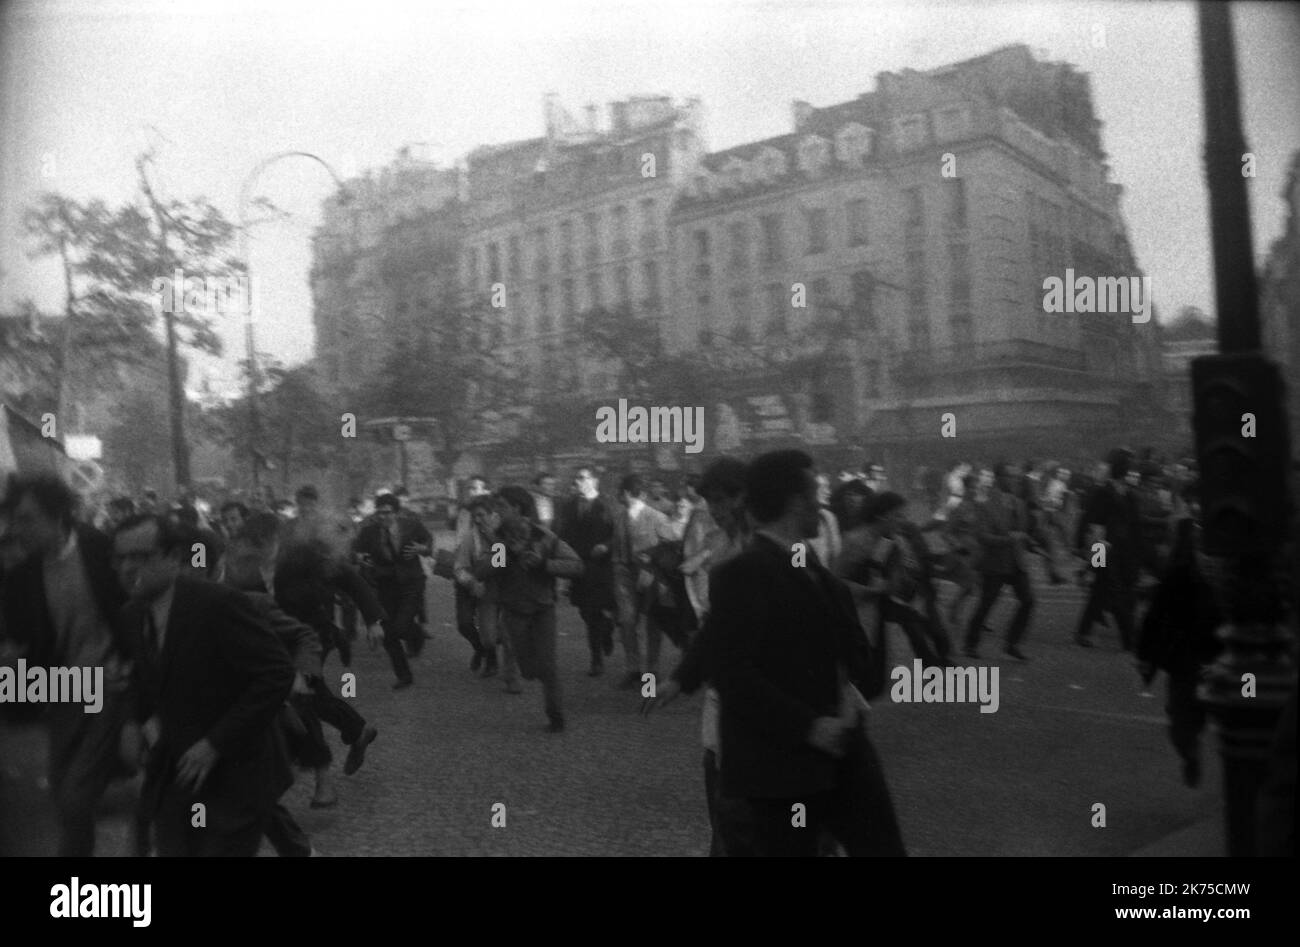 The volatile period of civil unrest in France during May 1968 was punctuated by demonstrations and massive general strikes as well as the occupation of universities and factories across France. At the height of its fervor, it brought the entire economy of France to a virtual halt. The protests reached such a point that political leaders feared civil war or revolution; the national government itself momentarily ceased to function after President CharlesdeGaulle secretly fled France for a few hours. The protests spurred an artistic movement, with songs, imaginative graffiti, posters, and slogans Stock Photo